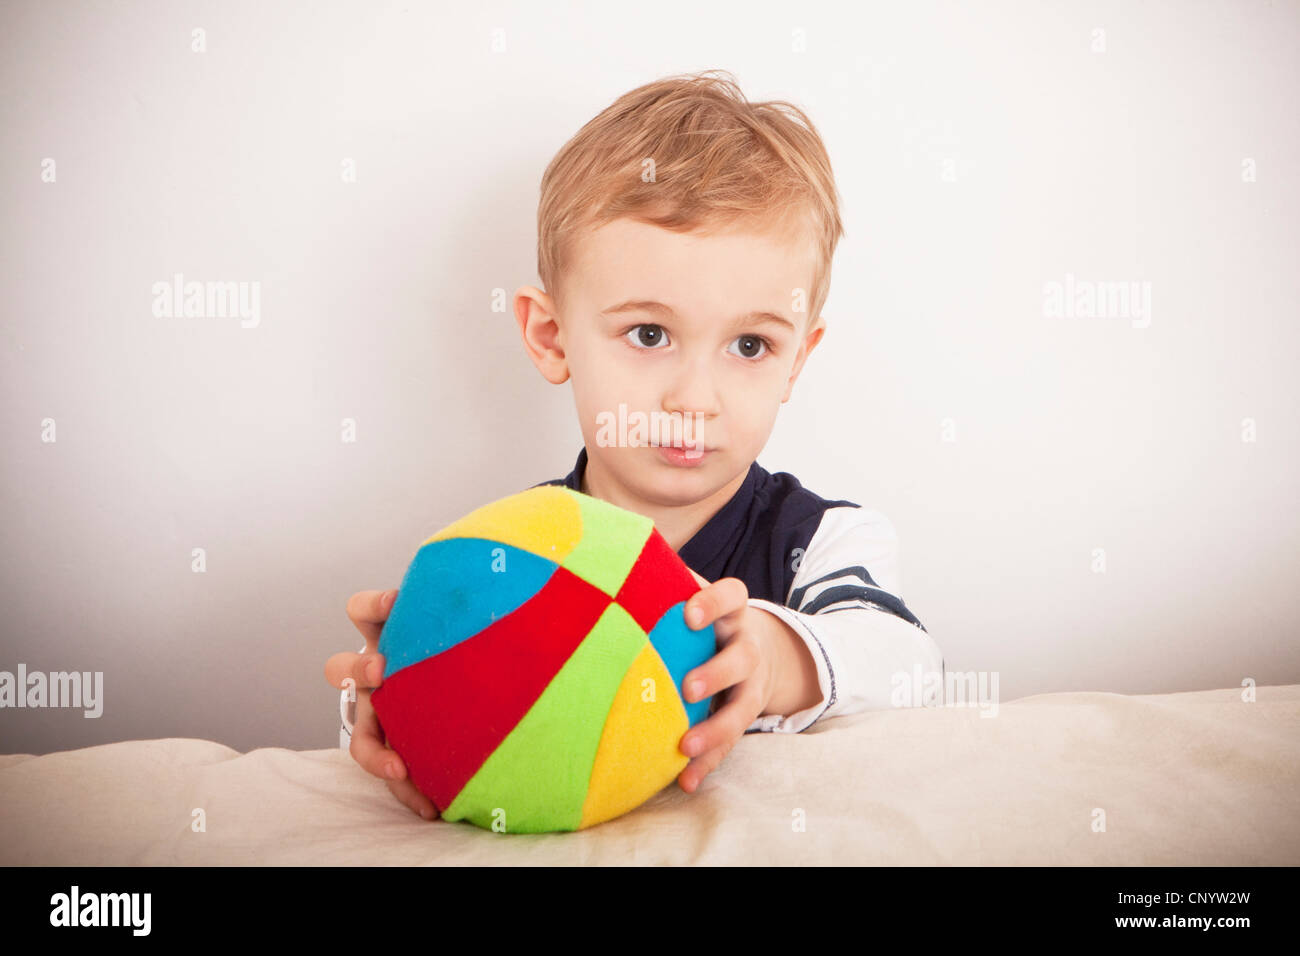 a child playing with ball Stock Photo